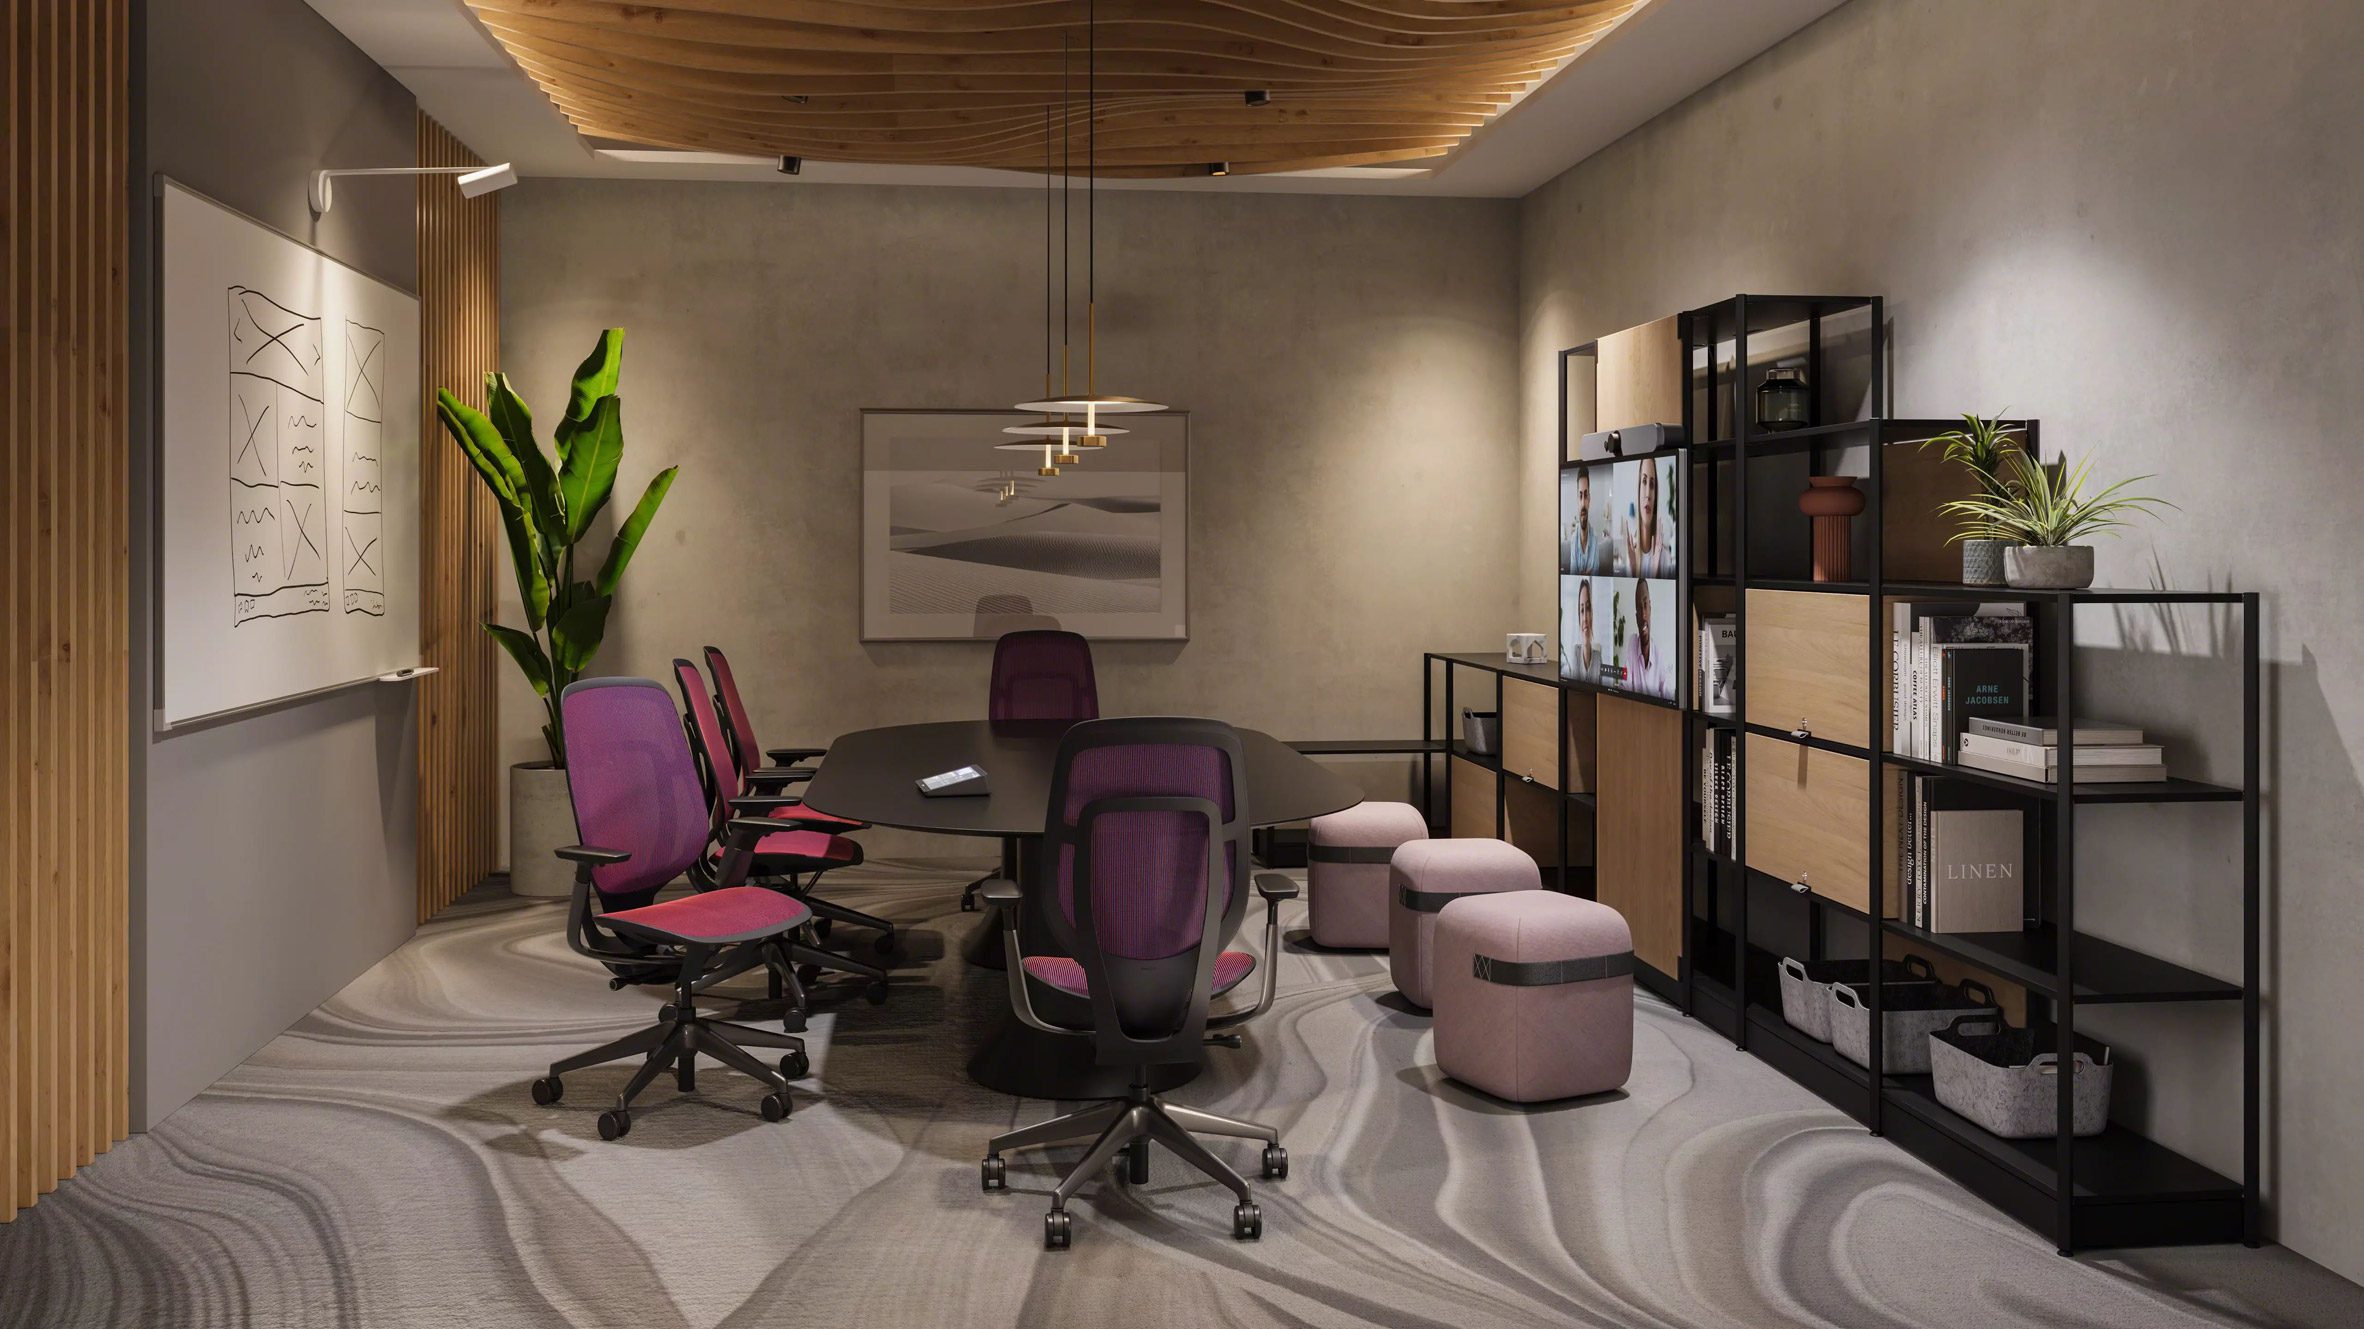 Purple chairs in office